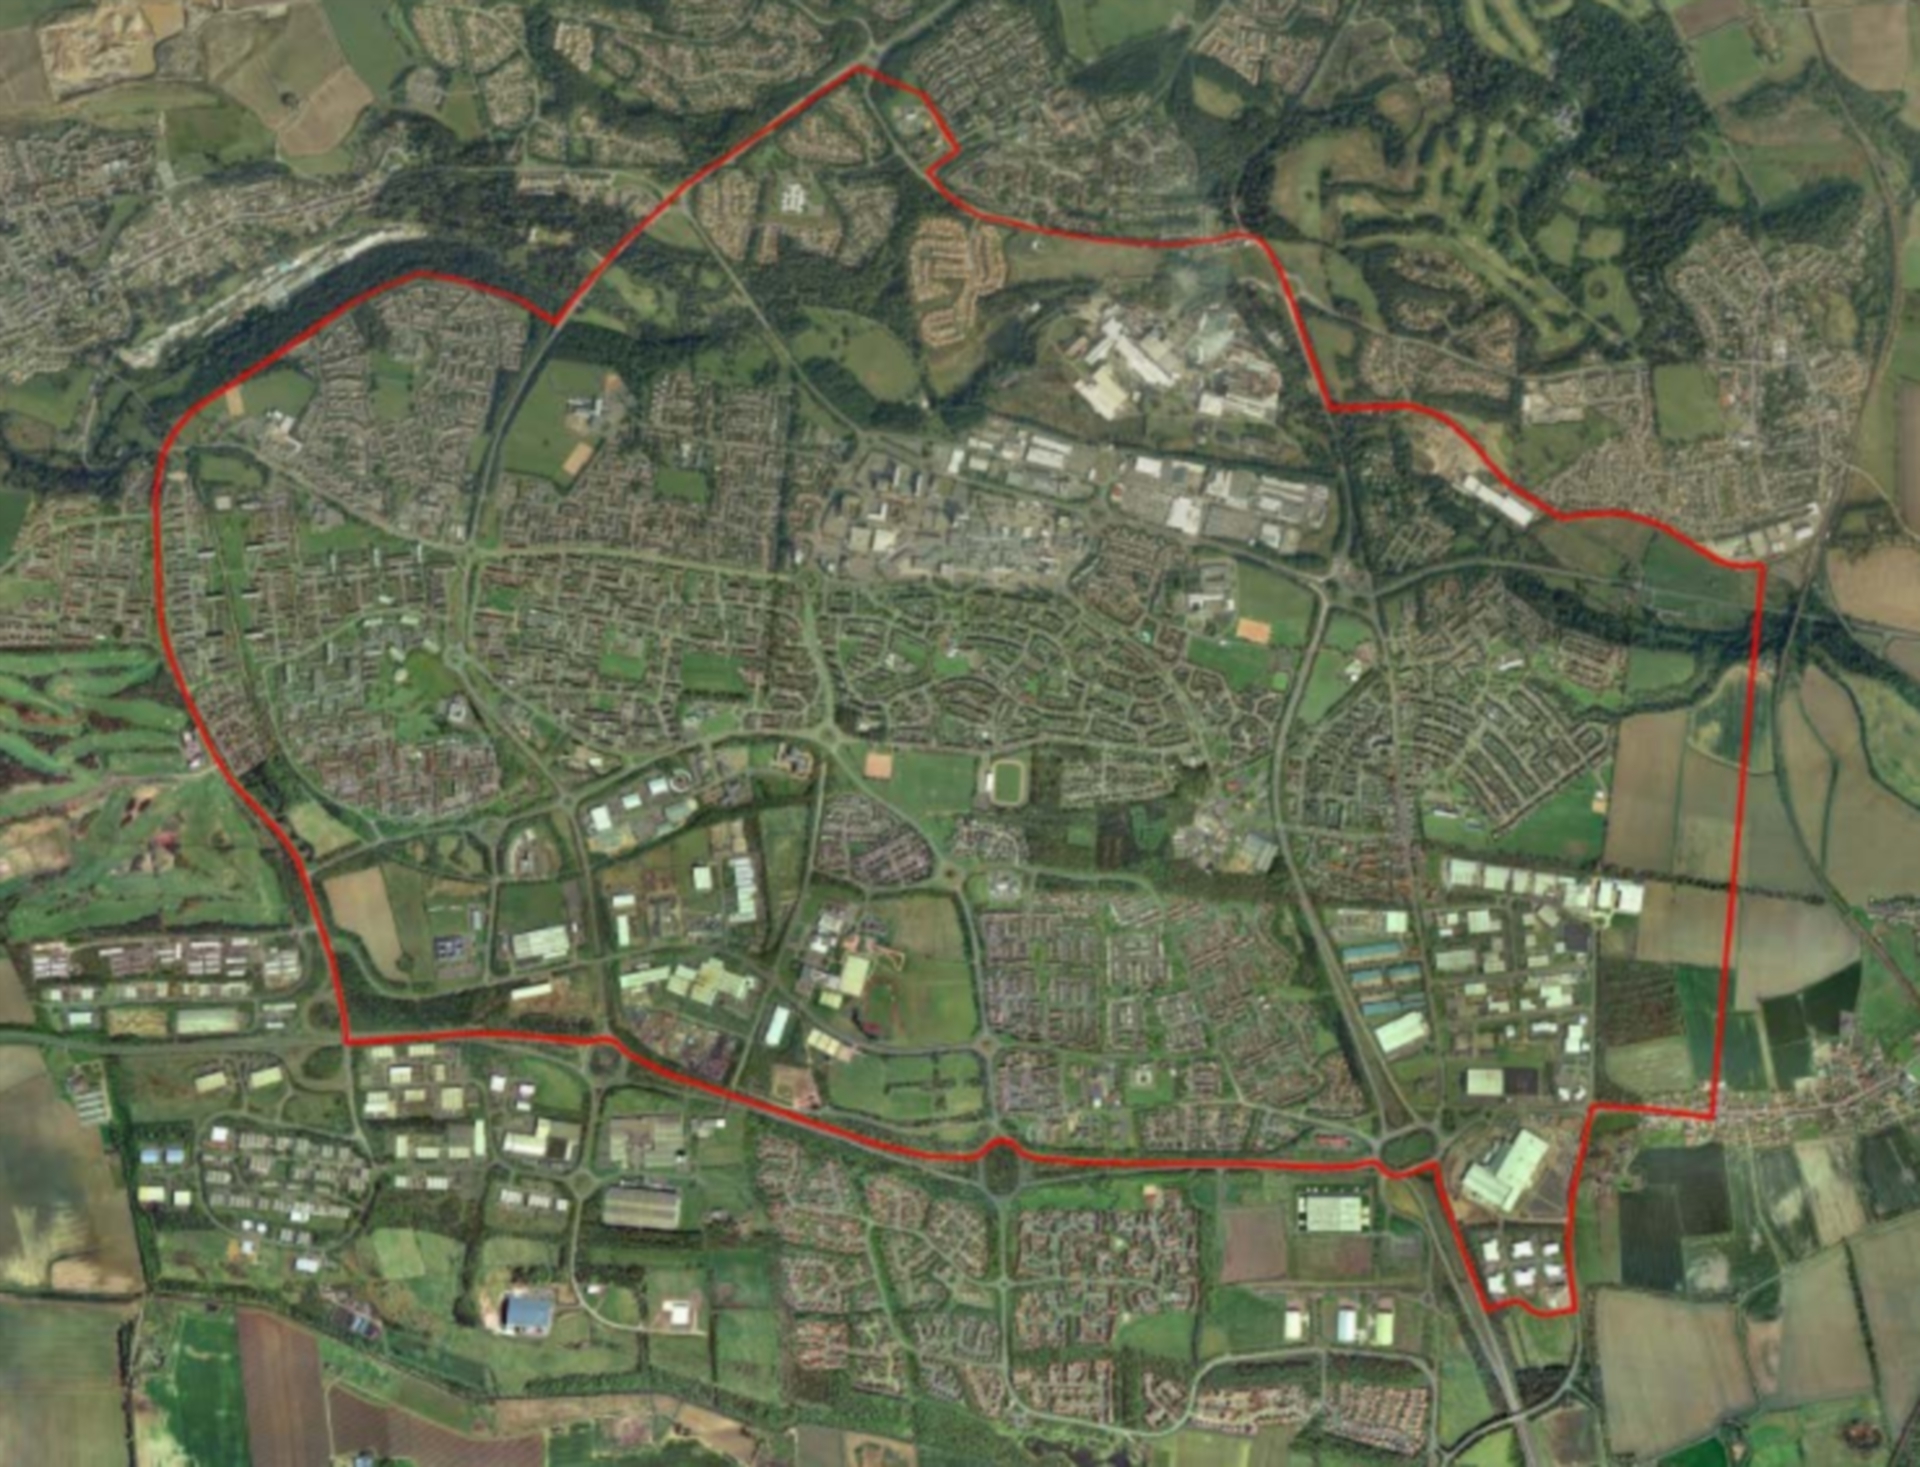 An aerial view of the area of Glenrothes to be covered by the heating system.